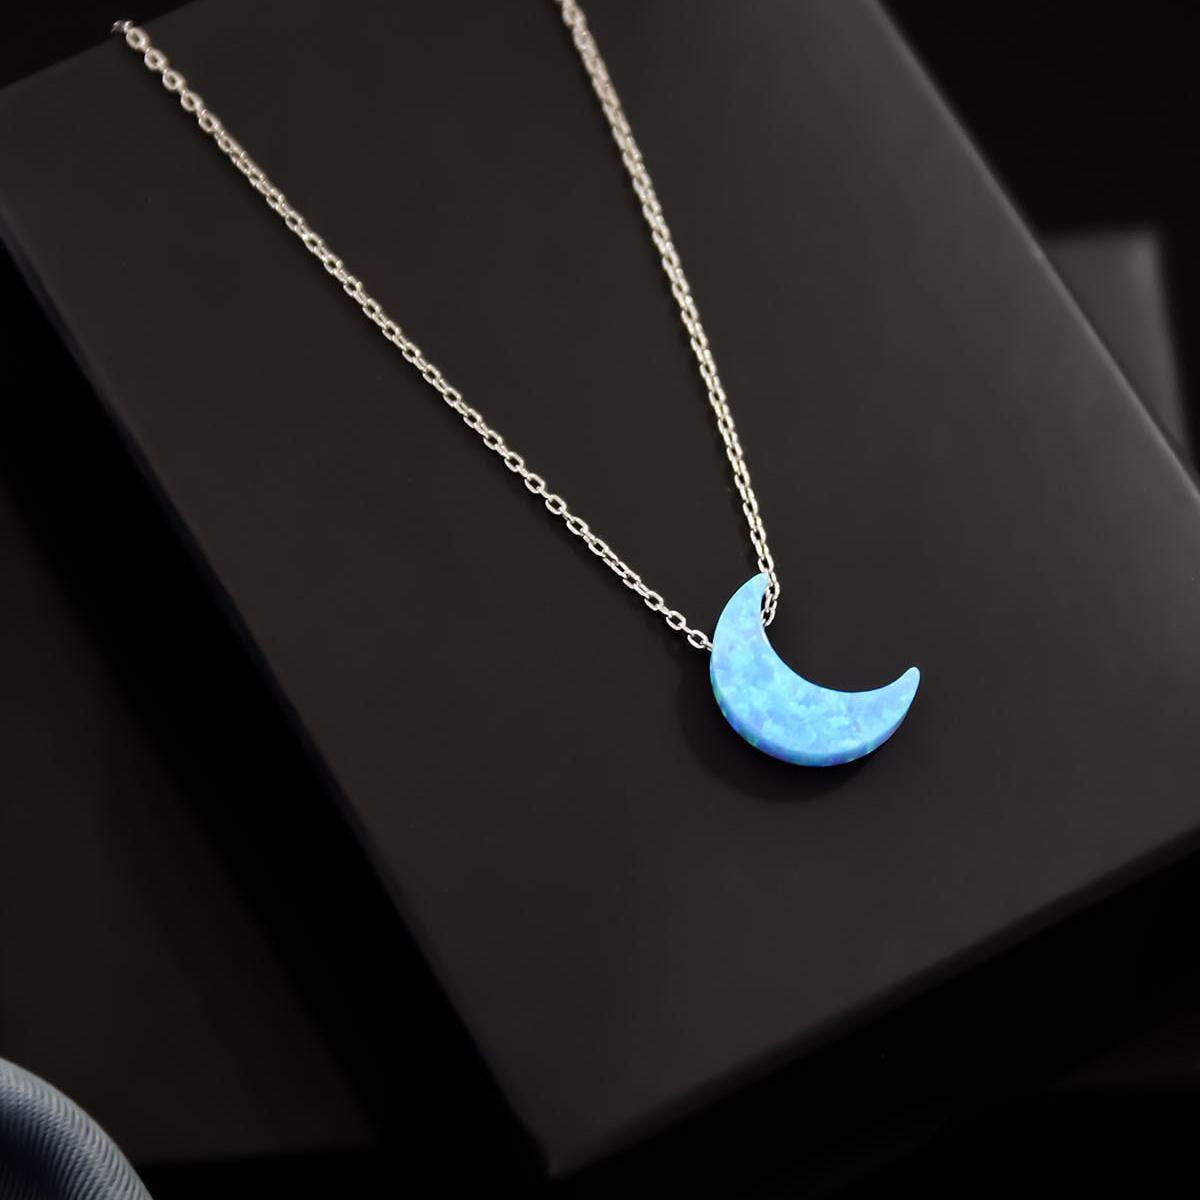 Moon Crescent Necklace • Blue Fire Opal Jewelry • White Fire Opal - Trending Silver Gifts